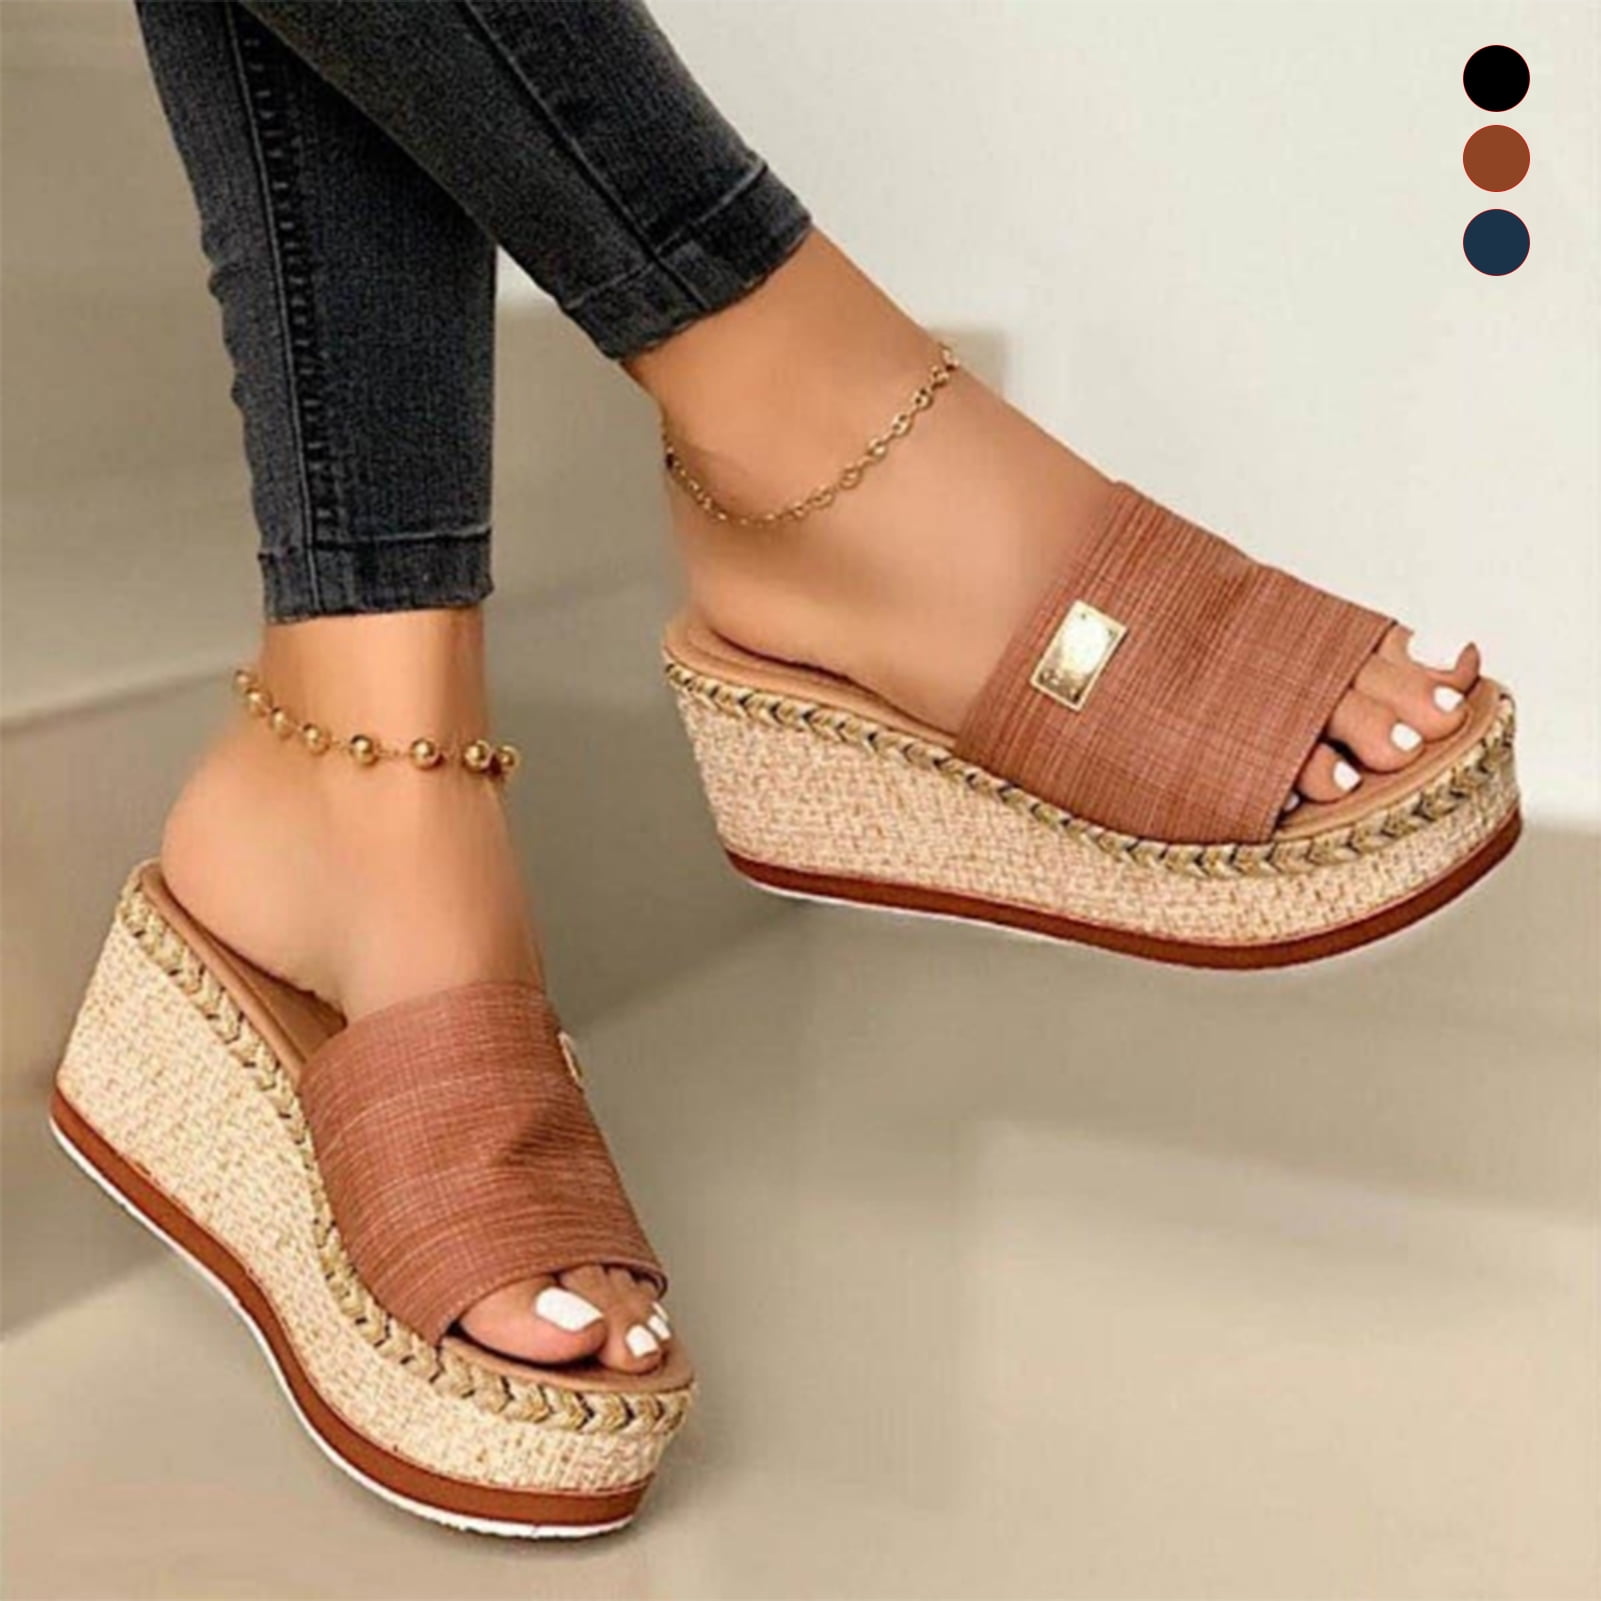 2019 Women's Slippers Hollow Beach Sandals Clogs Holiday Garden Casual Shoes Hot